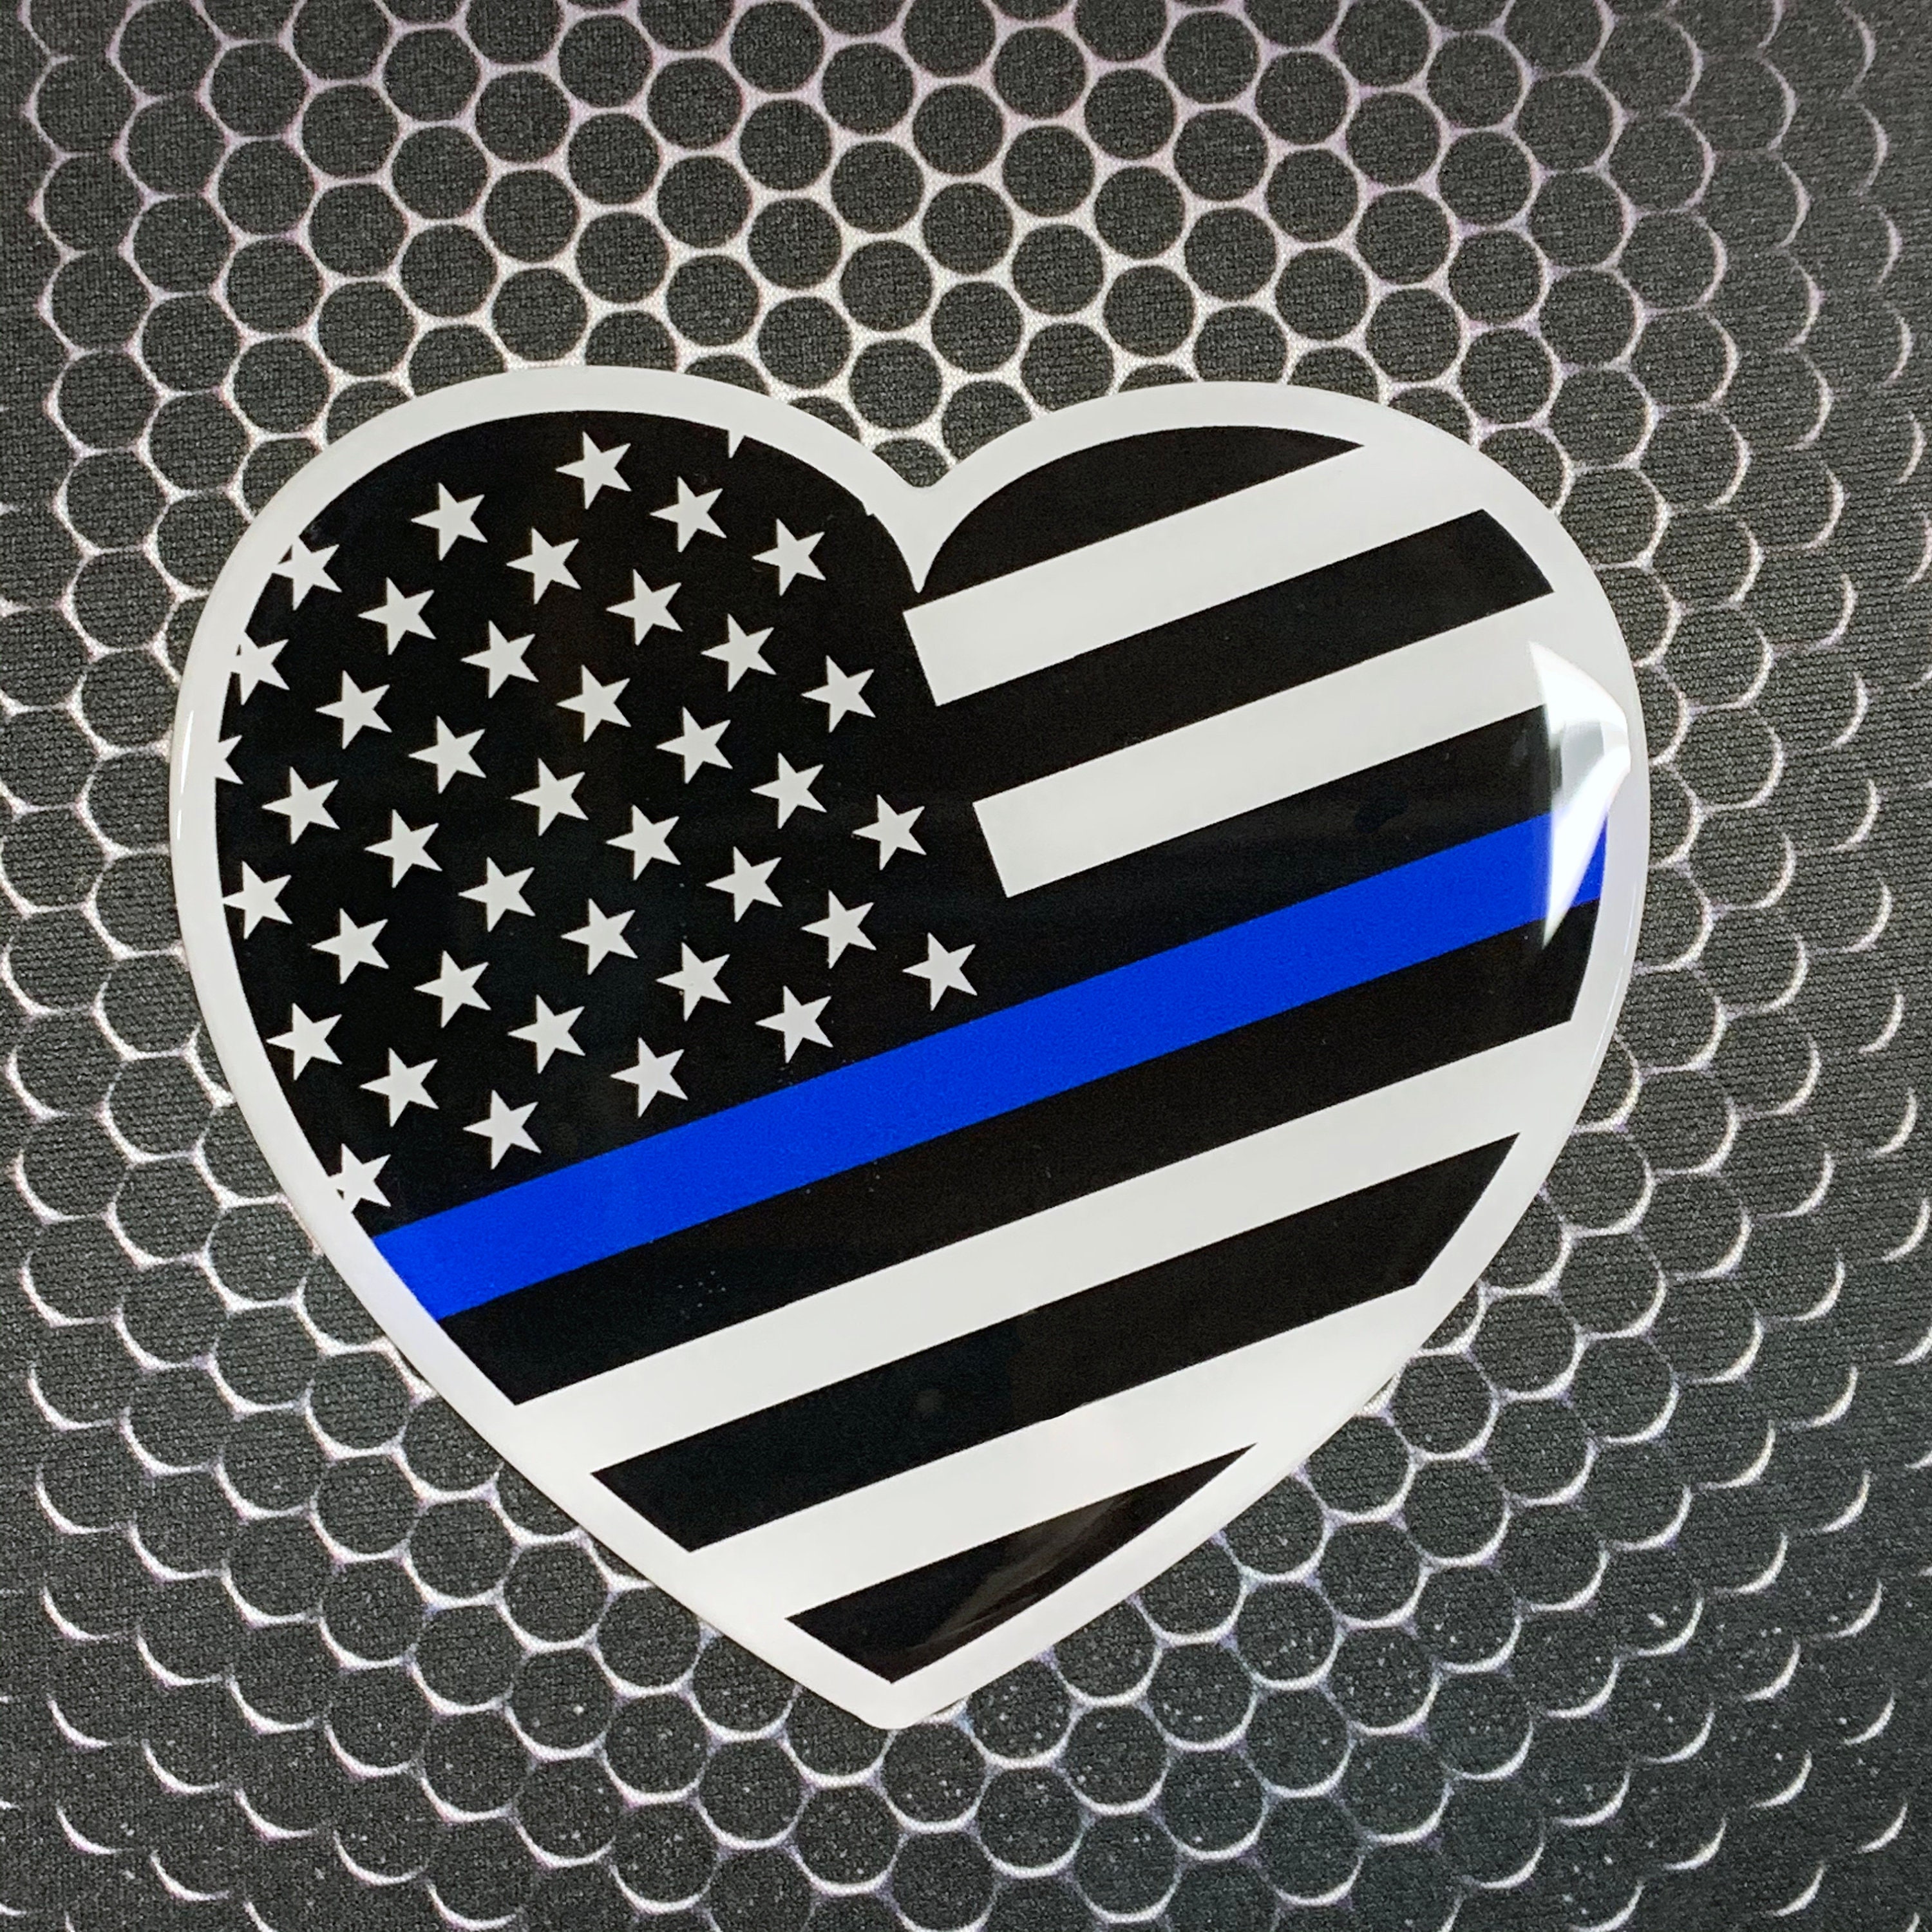 patriotic tbl heart Made In U.S.A THIN BLUE LINE Love Domed Gloss Black Emblem Proud Police Flag 3D Sticker 4x 3.65 Merica